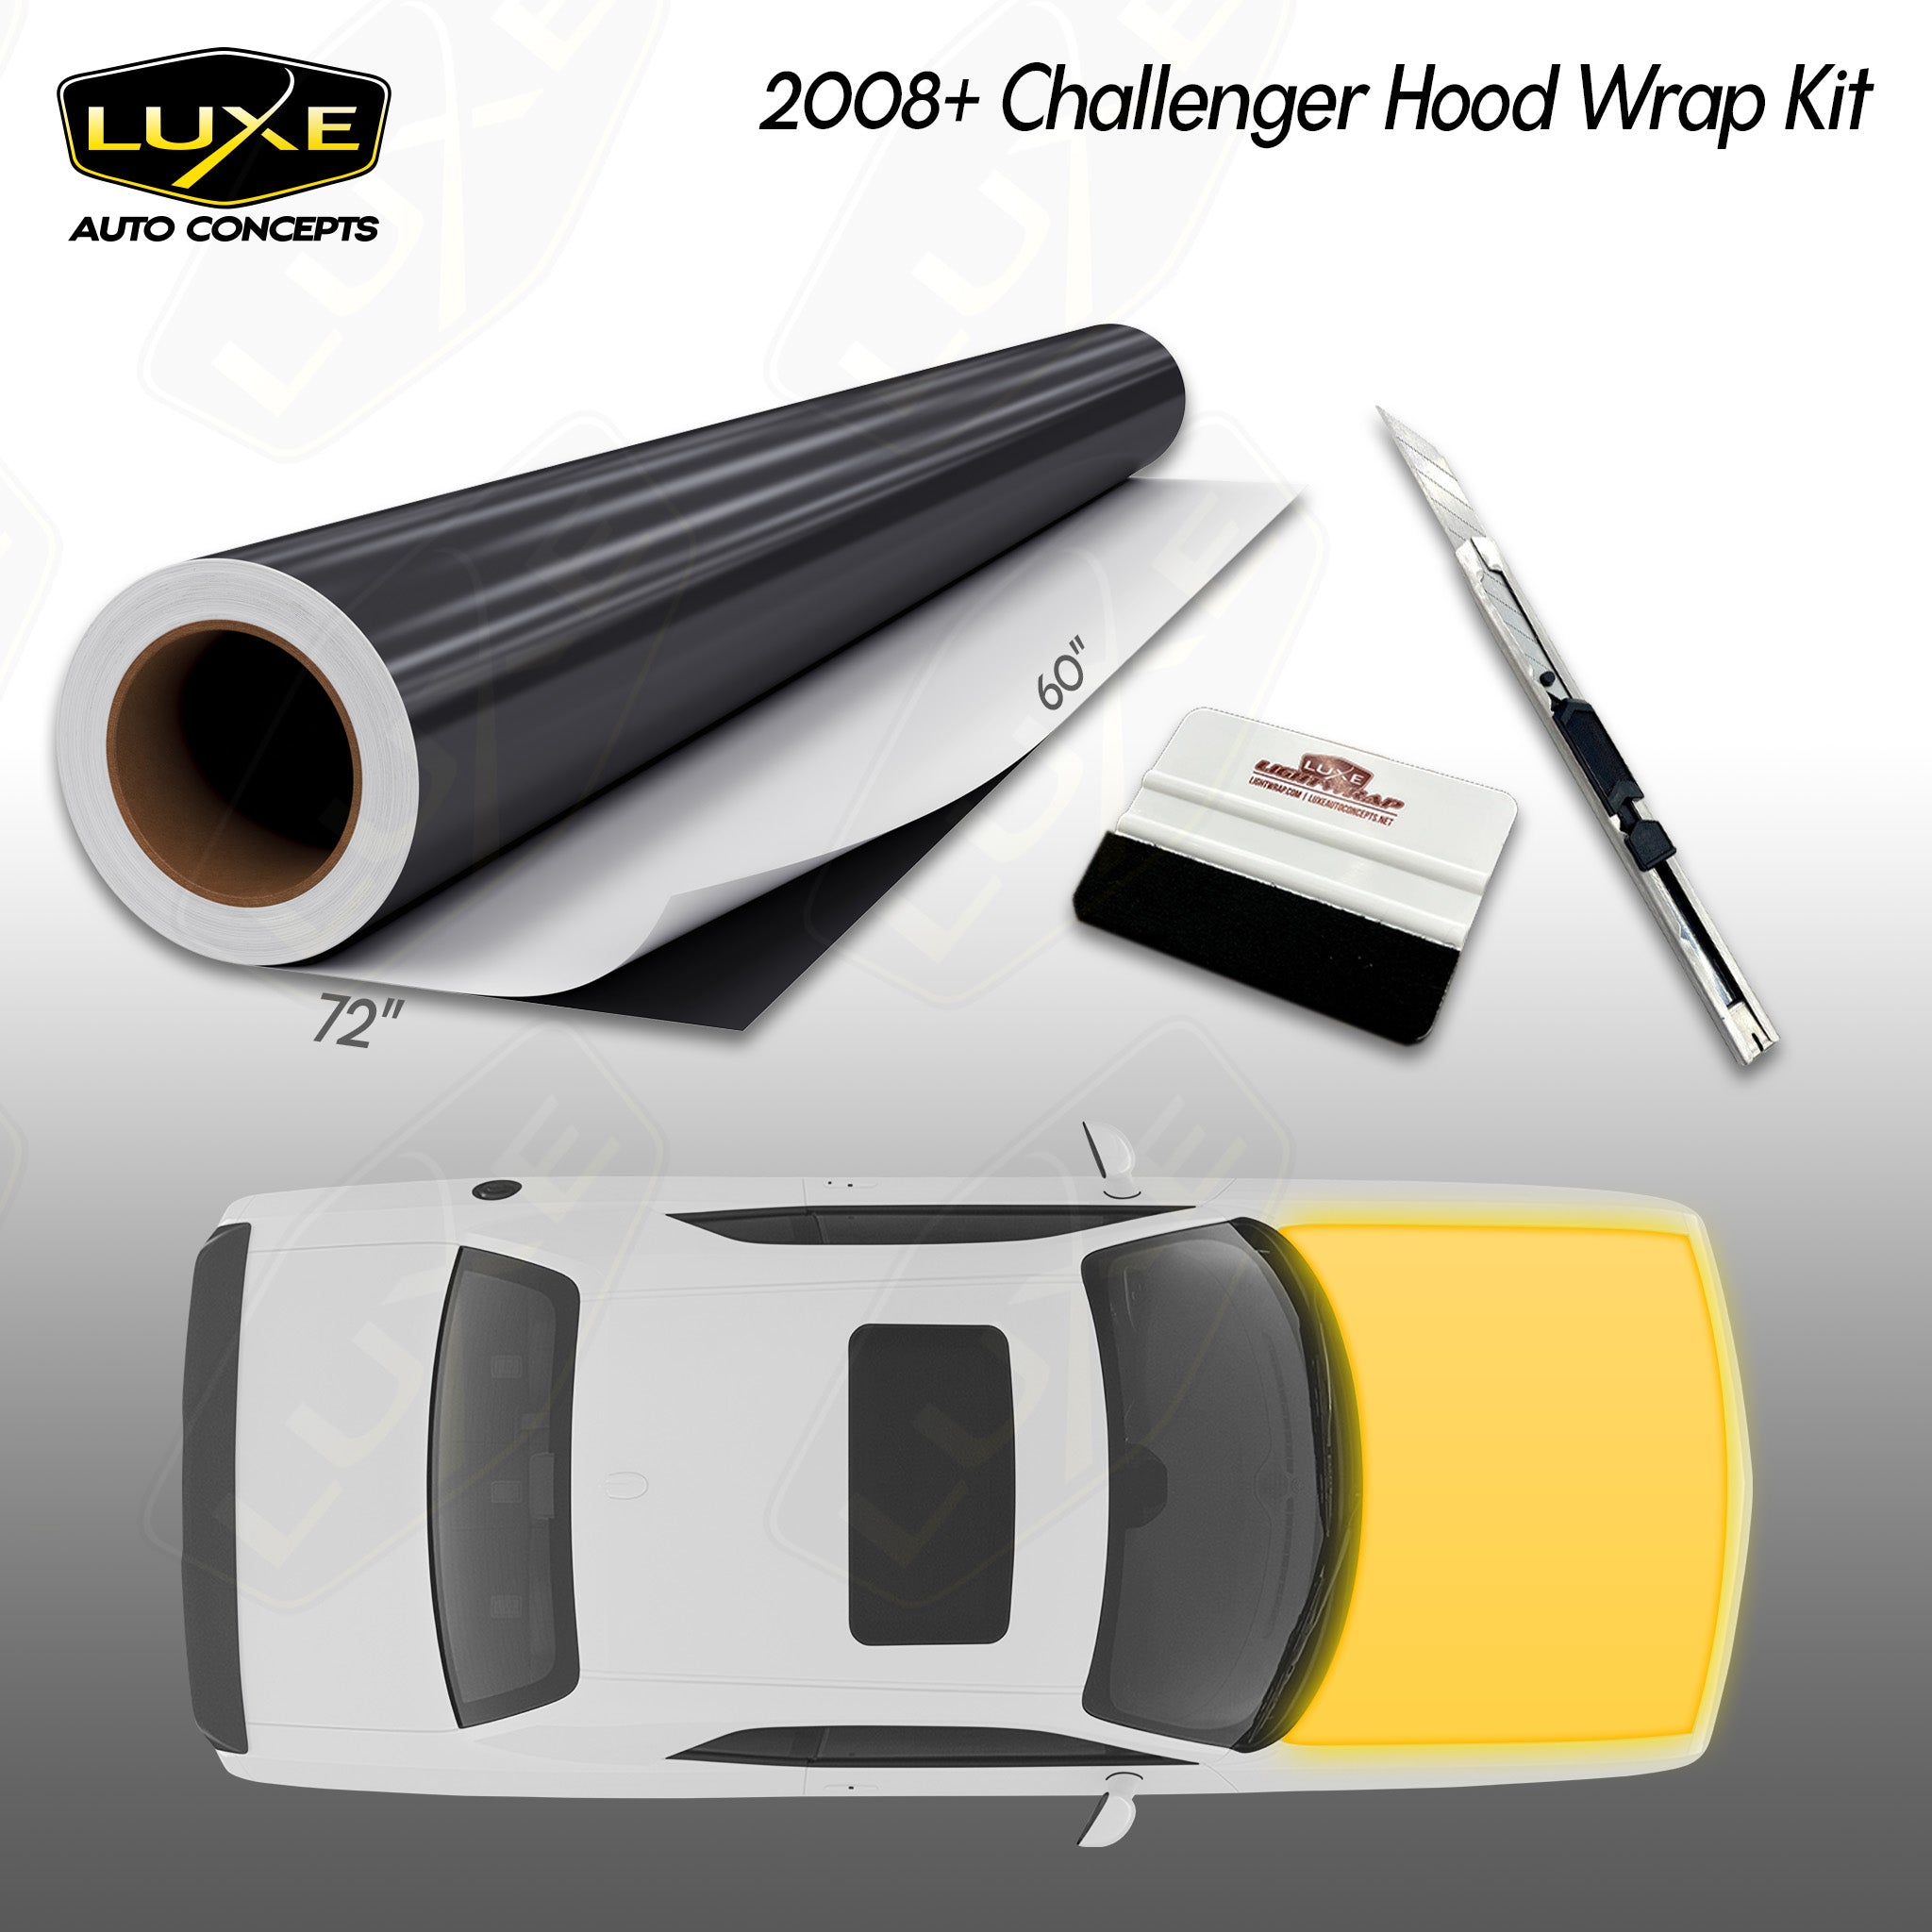 2008+ Challenger Hood Wrap Kit — Luxe Auto Concepts